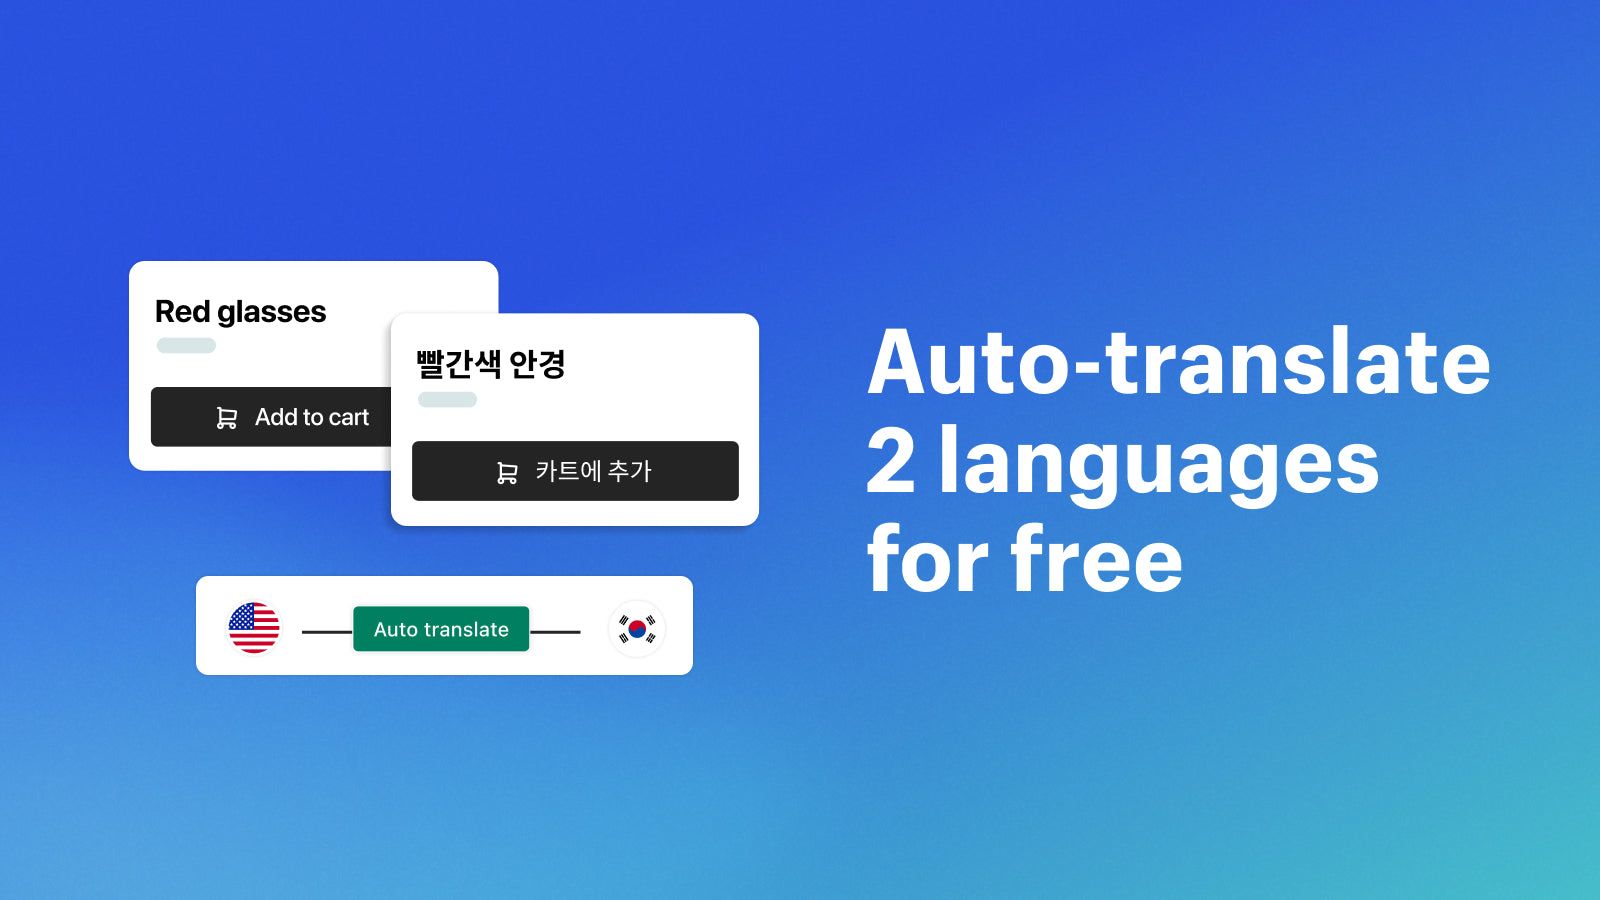 Auto-translate 2 languages for free